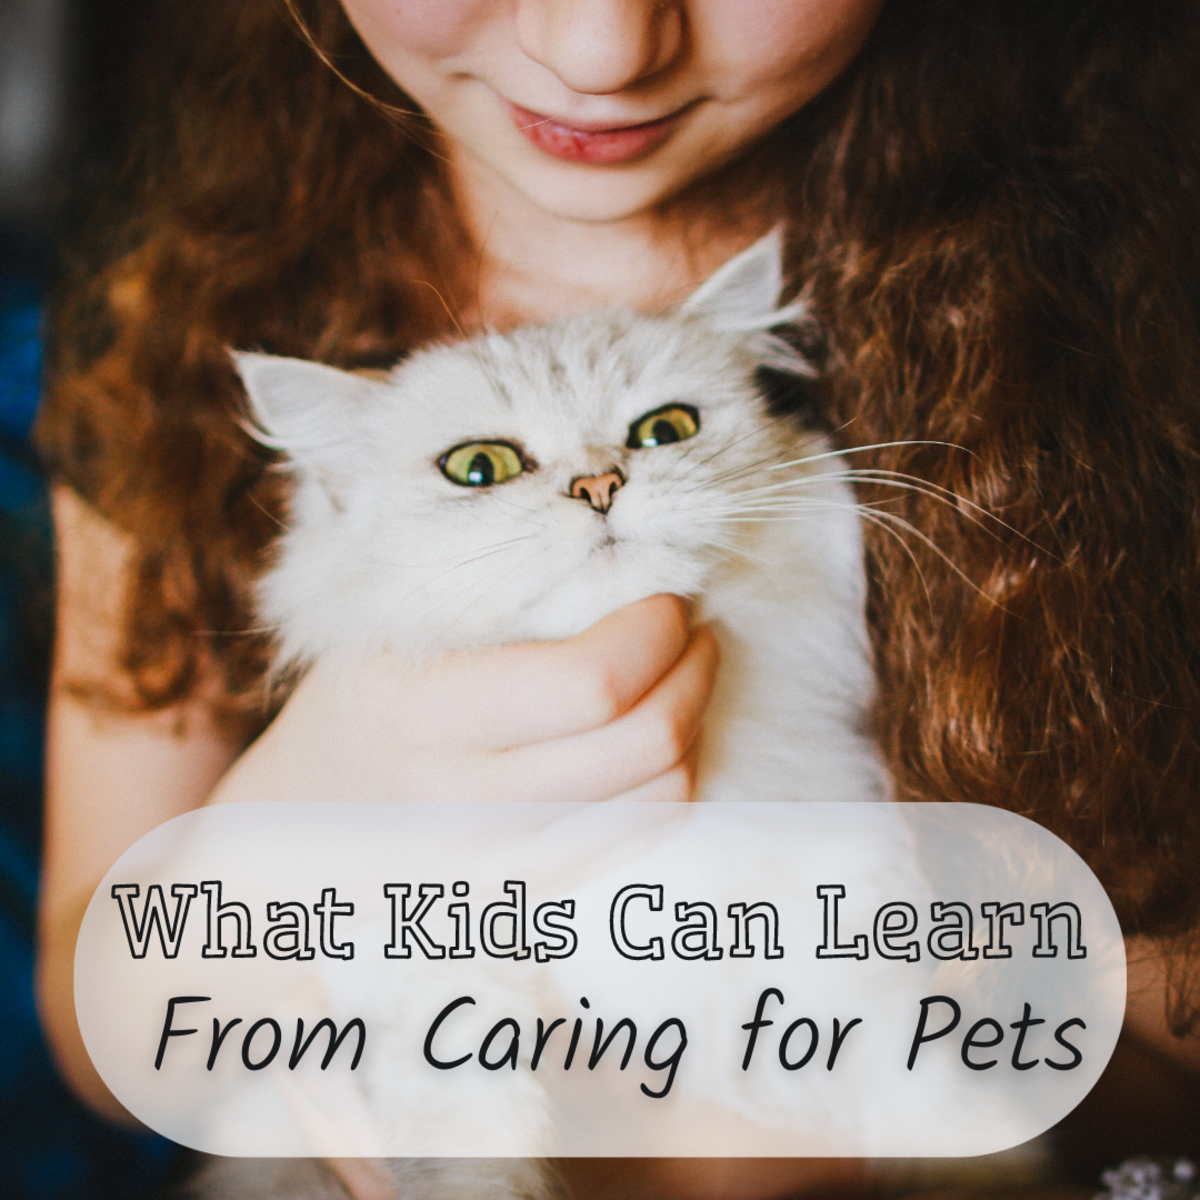 What can children learn from looking after pets?